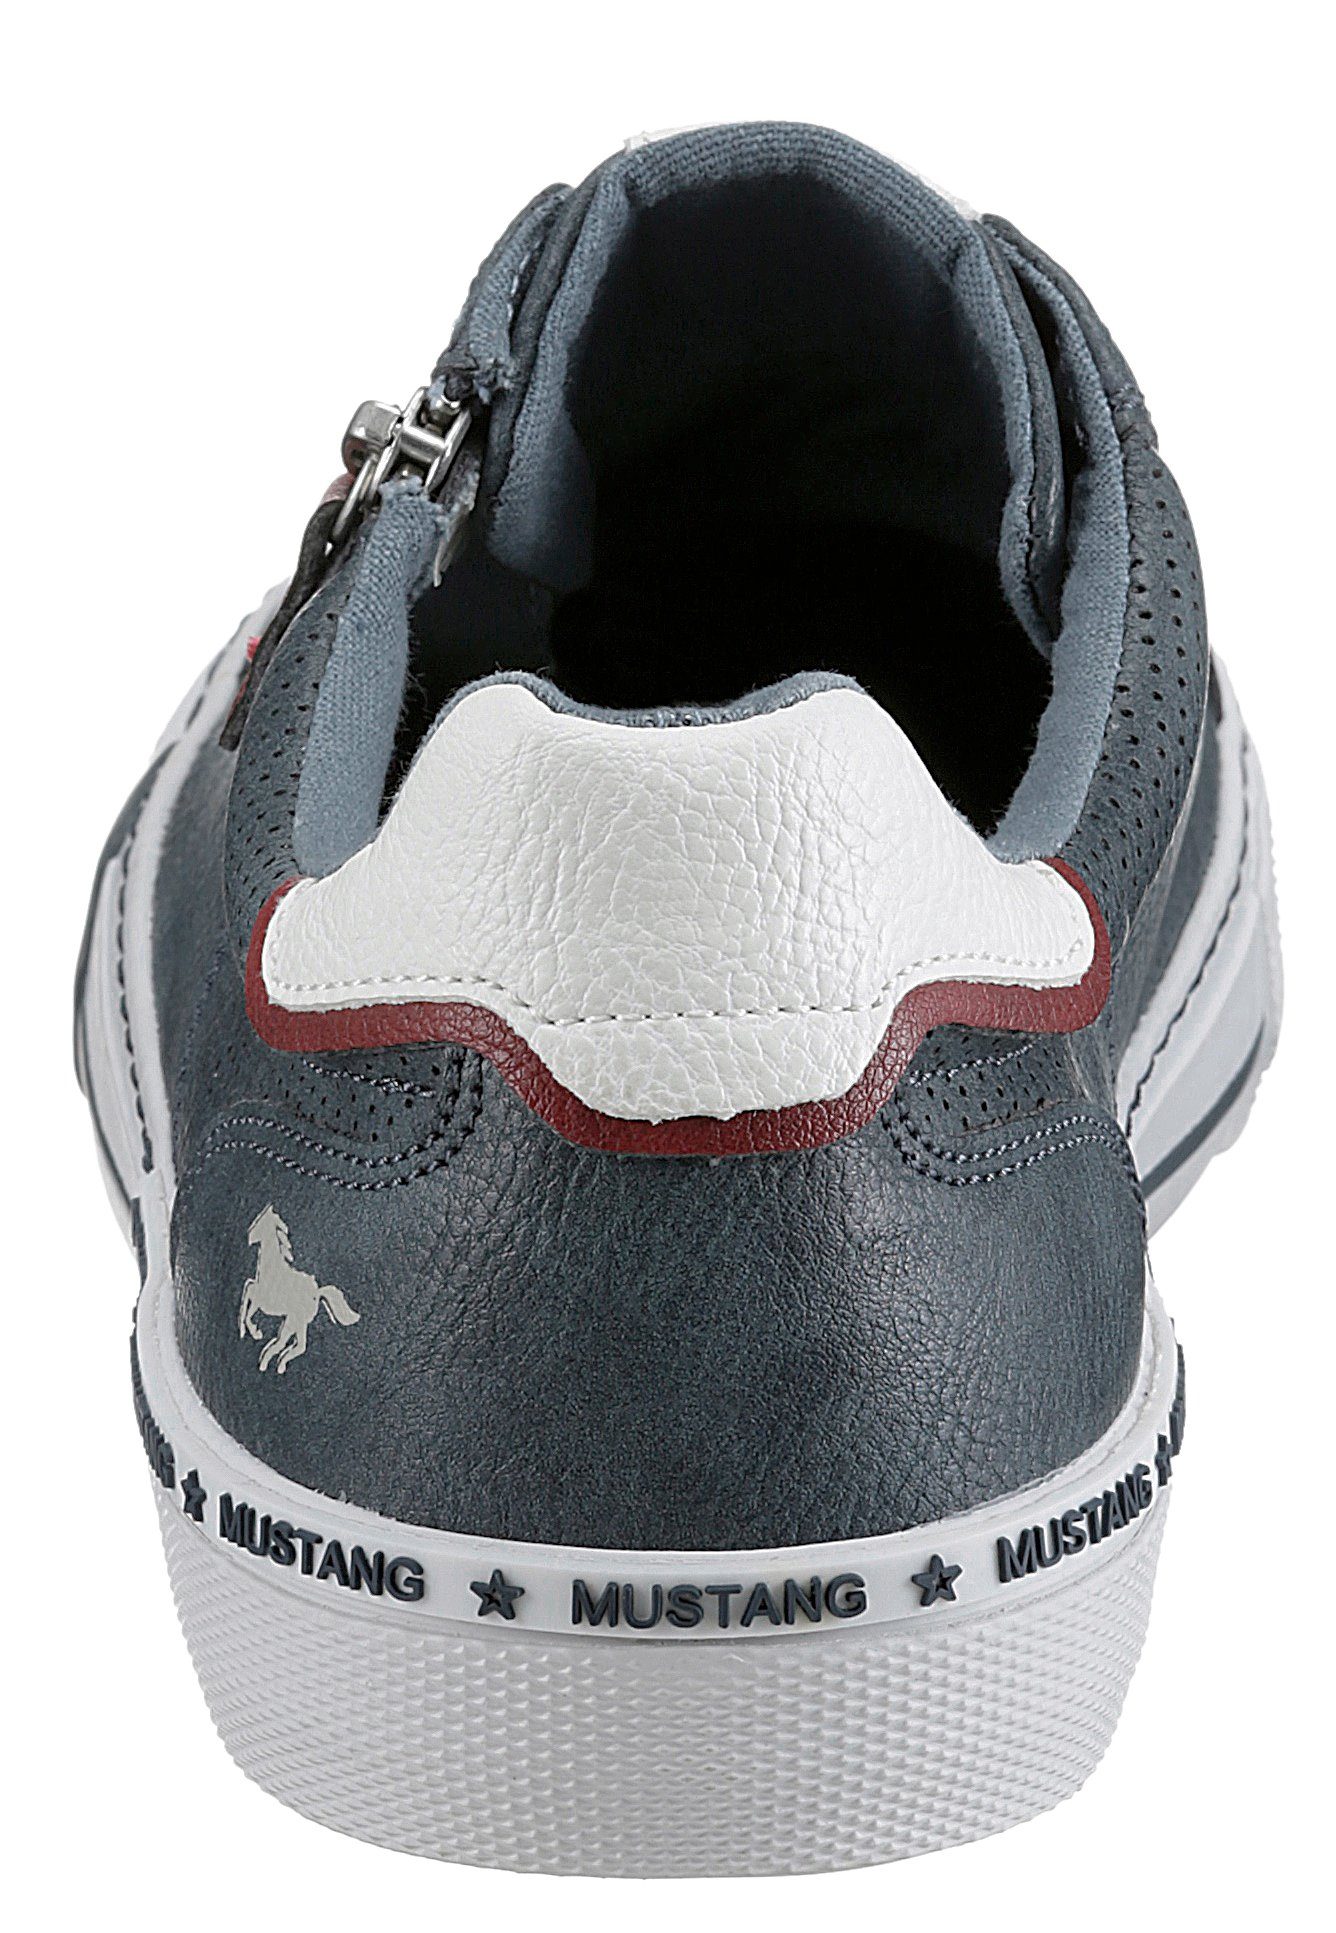 mit Mustang jeansblau Perforation Sneaker Shoes